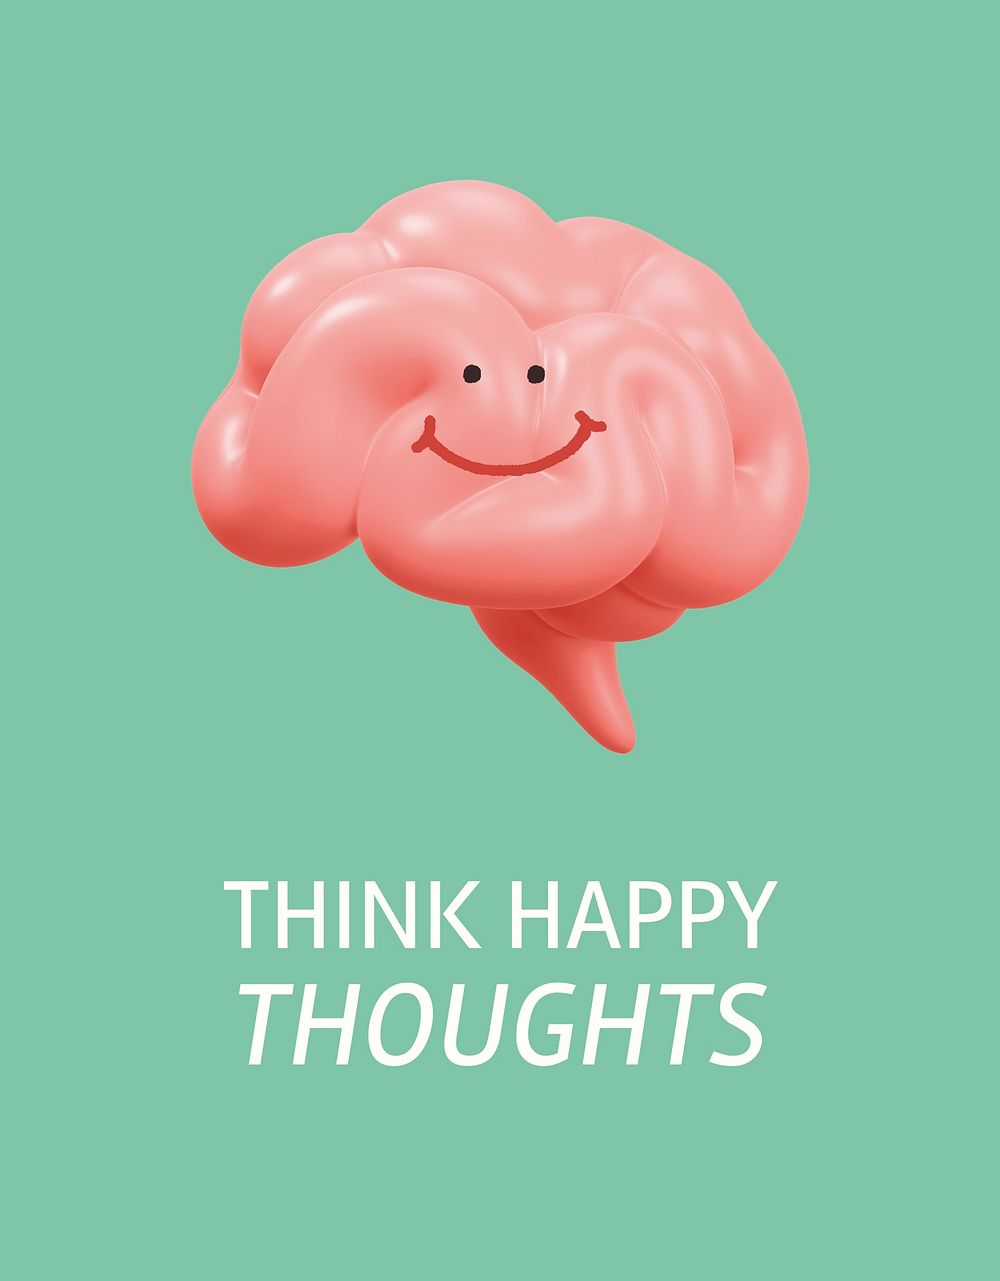 Think happy thoughts flyer template, smiling brain 3D illustration vector